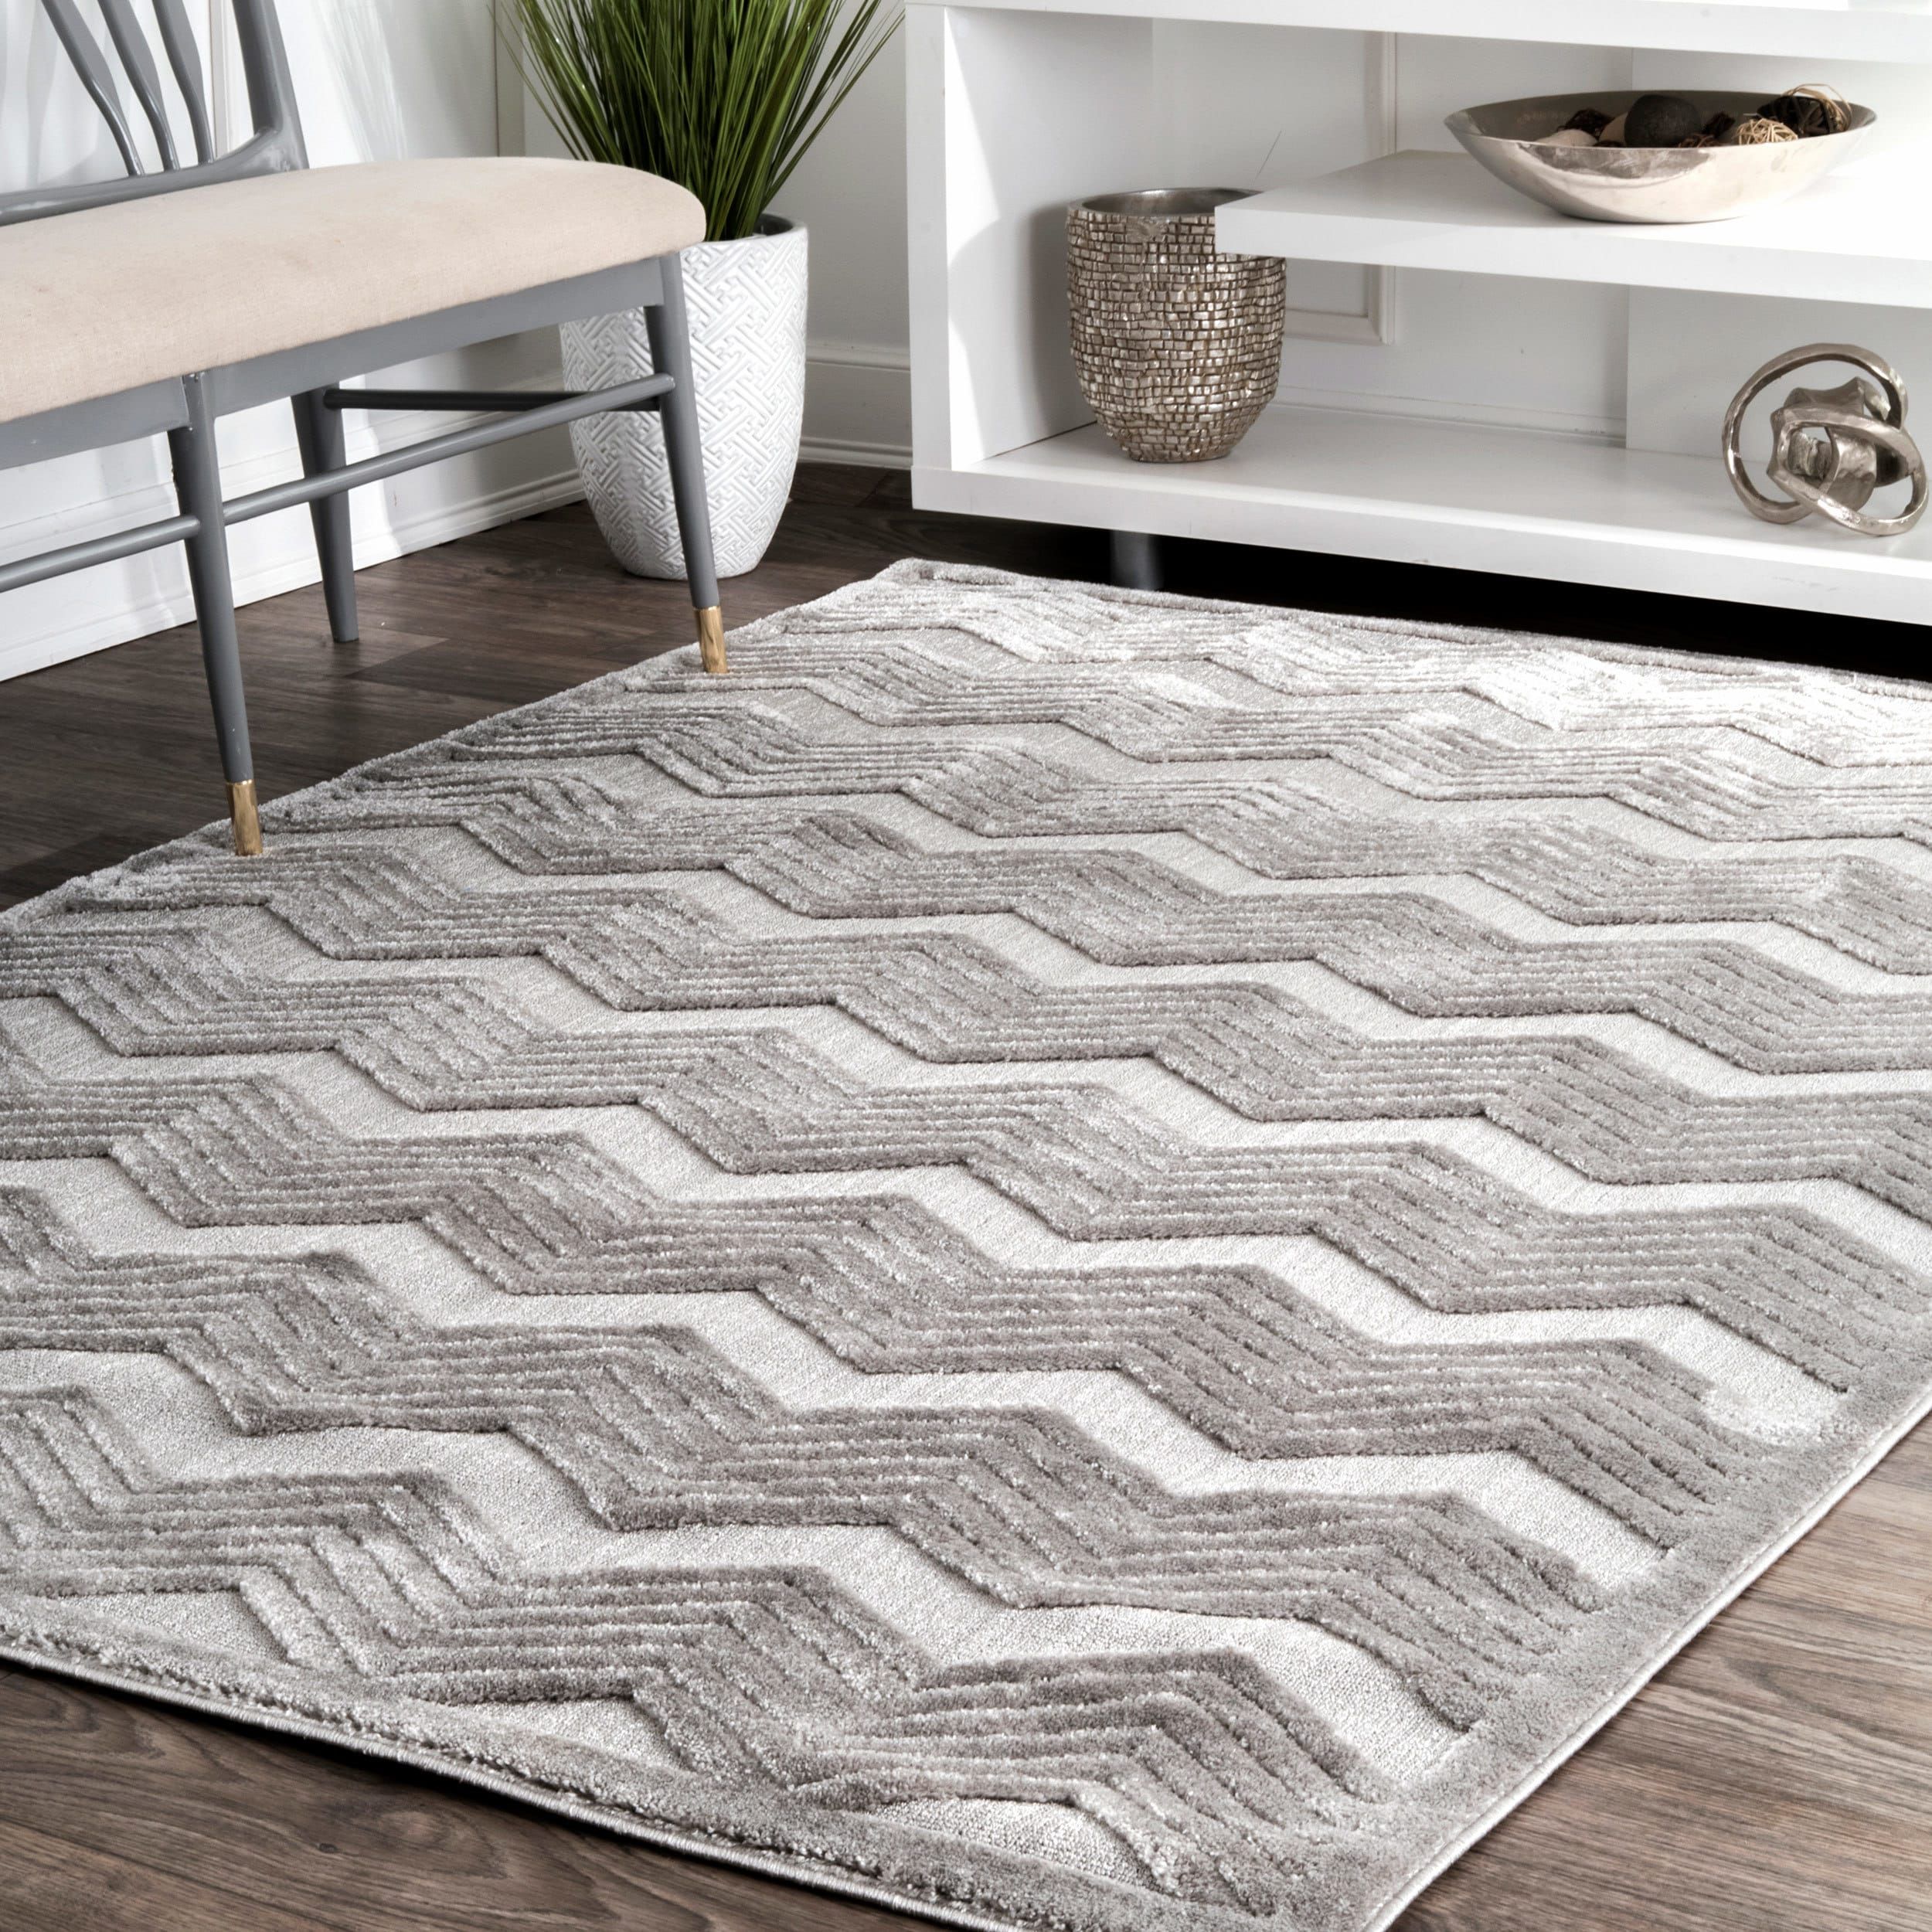 The Best Discounts on Area Rugs